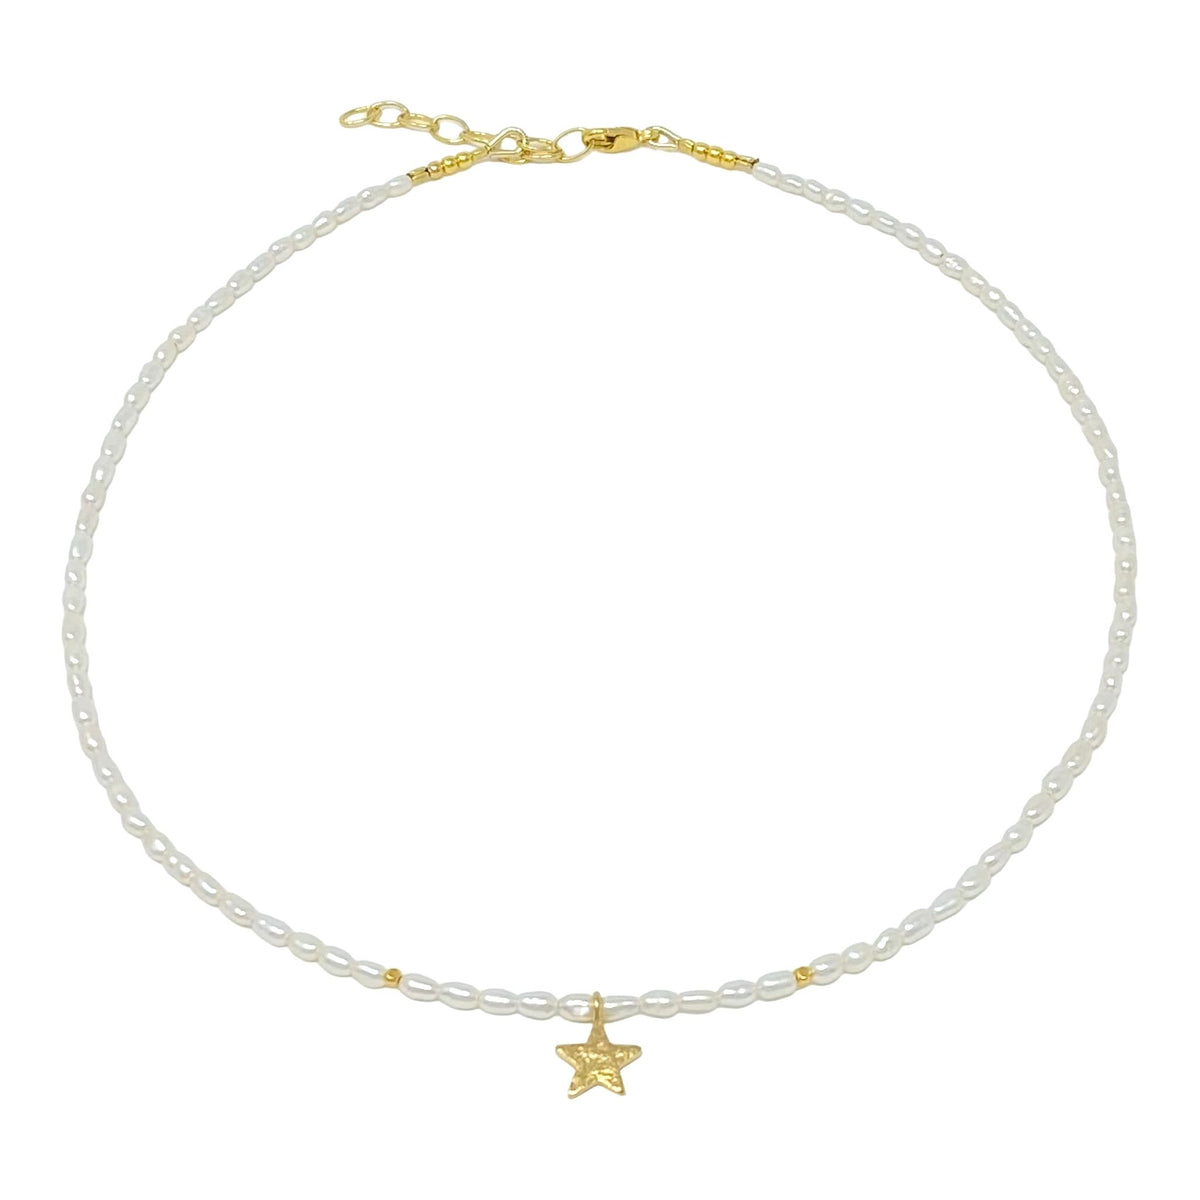 Bestselling delicate pearl choker from RAW Copenhagen, the boho shine pearl choker with cure handmade star pendant in gold vermeil